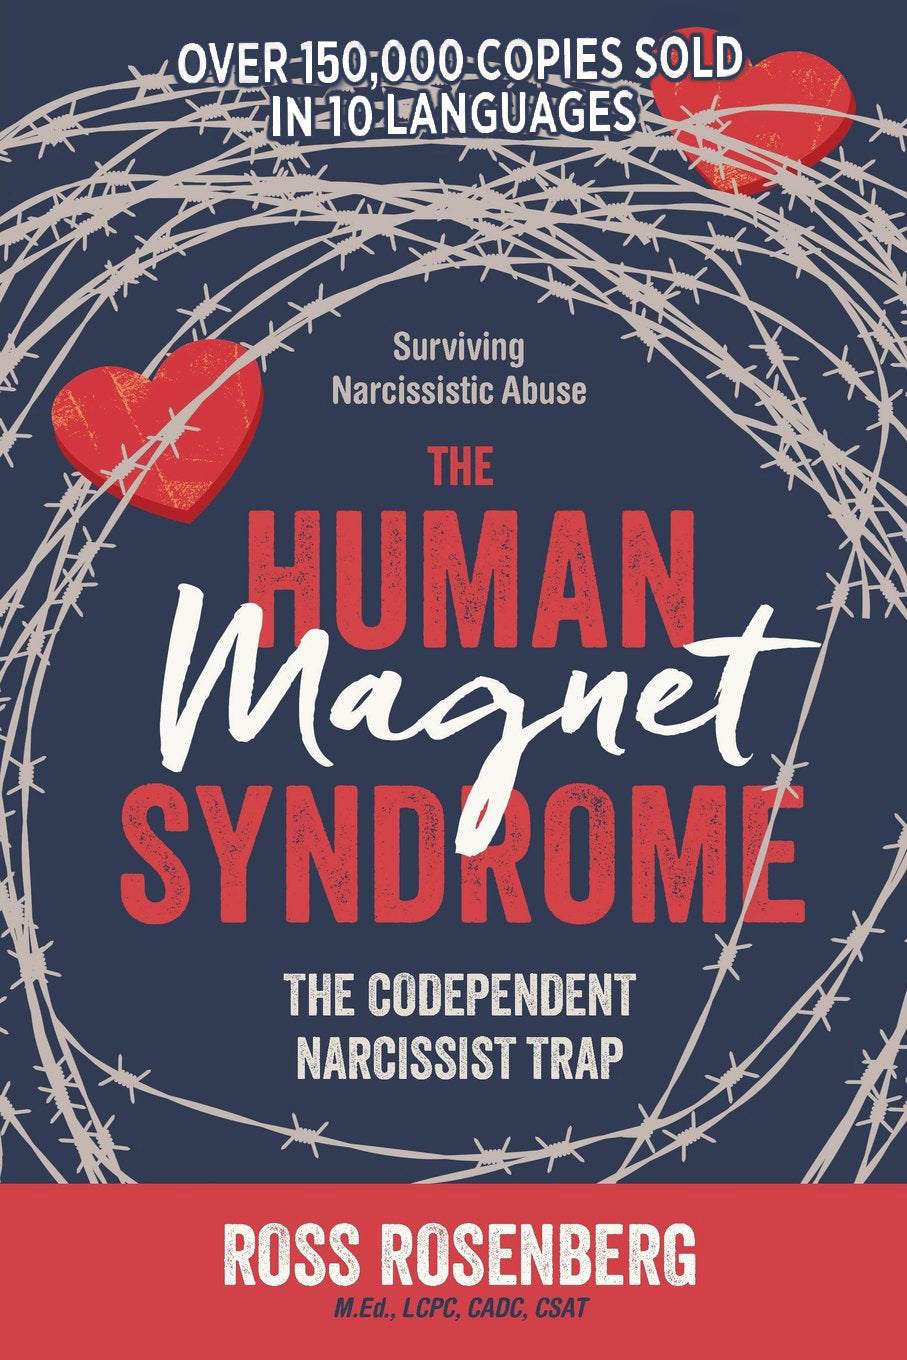 The Human Magnet Syndrome: The Codependent Narcissist Trap (2018) (Personally Inscribed by Ross Rosenberg)